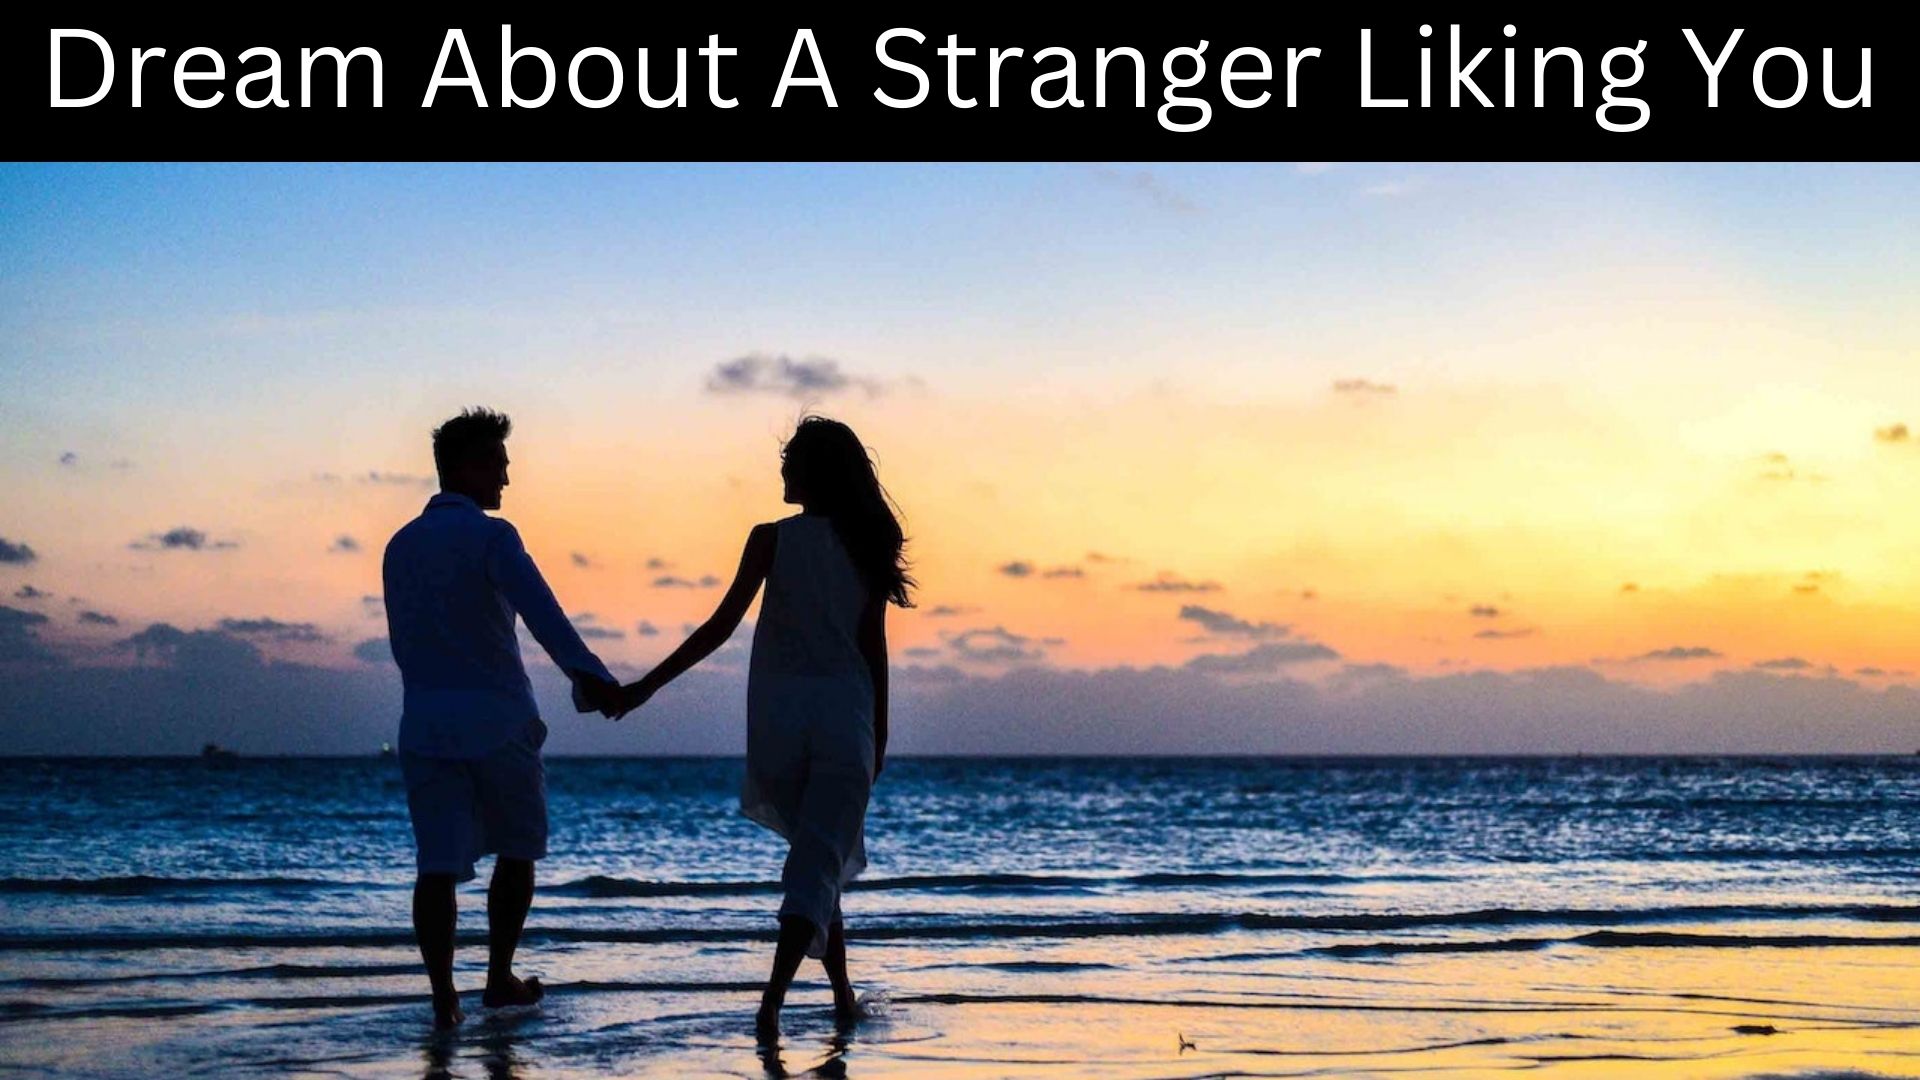 Dream About A Stranger Liking You - Represents Strength, Trustworthiness, And Resilience